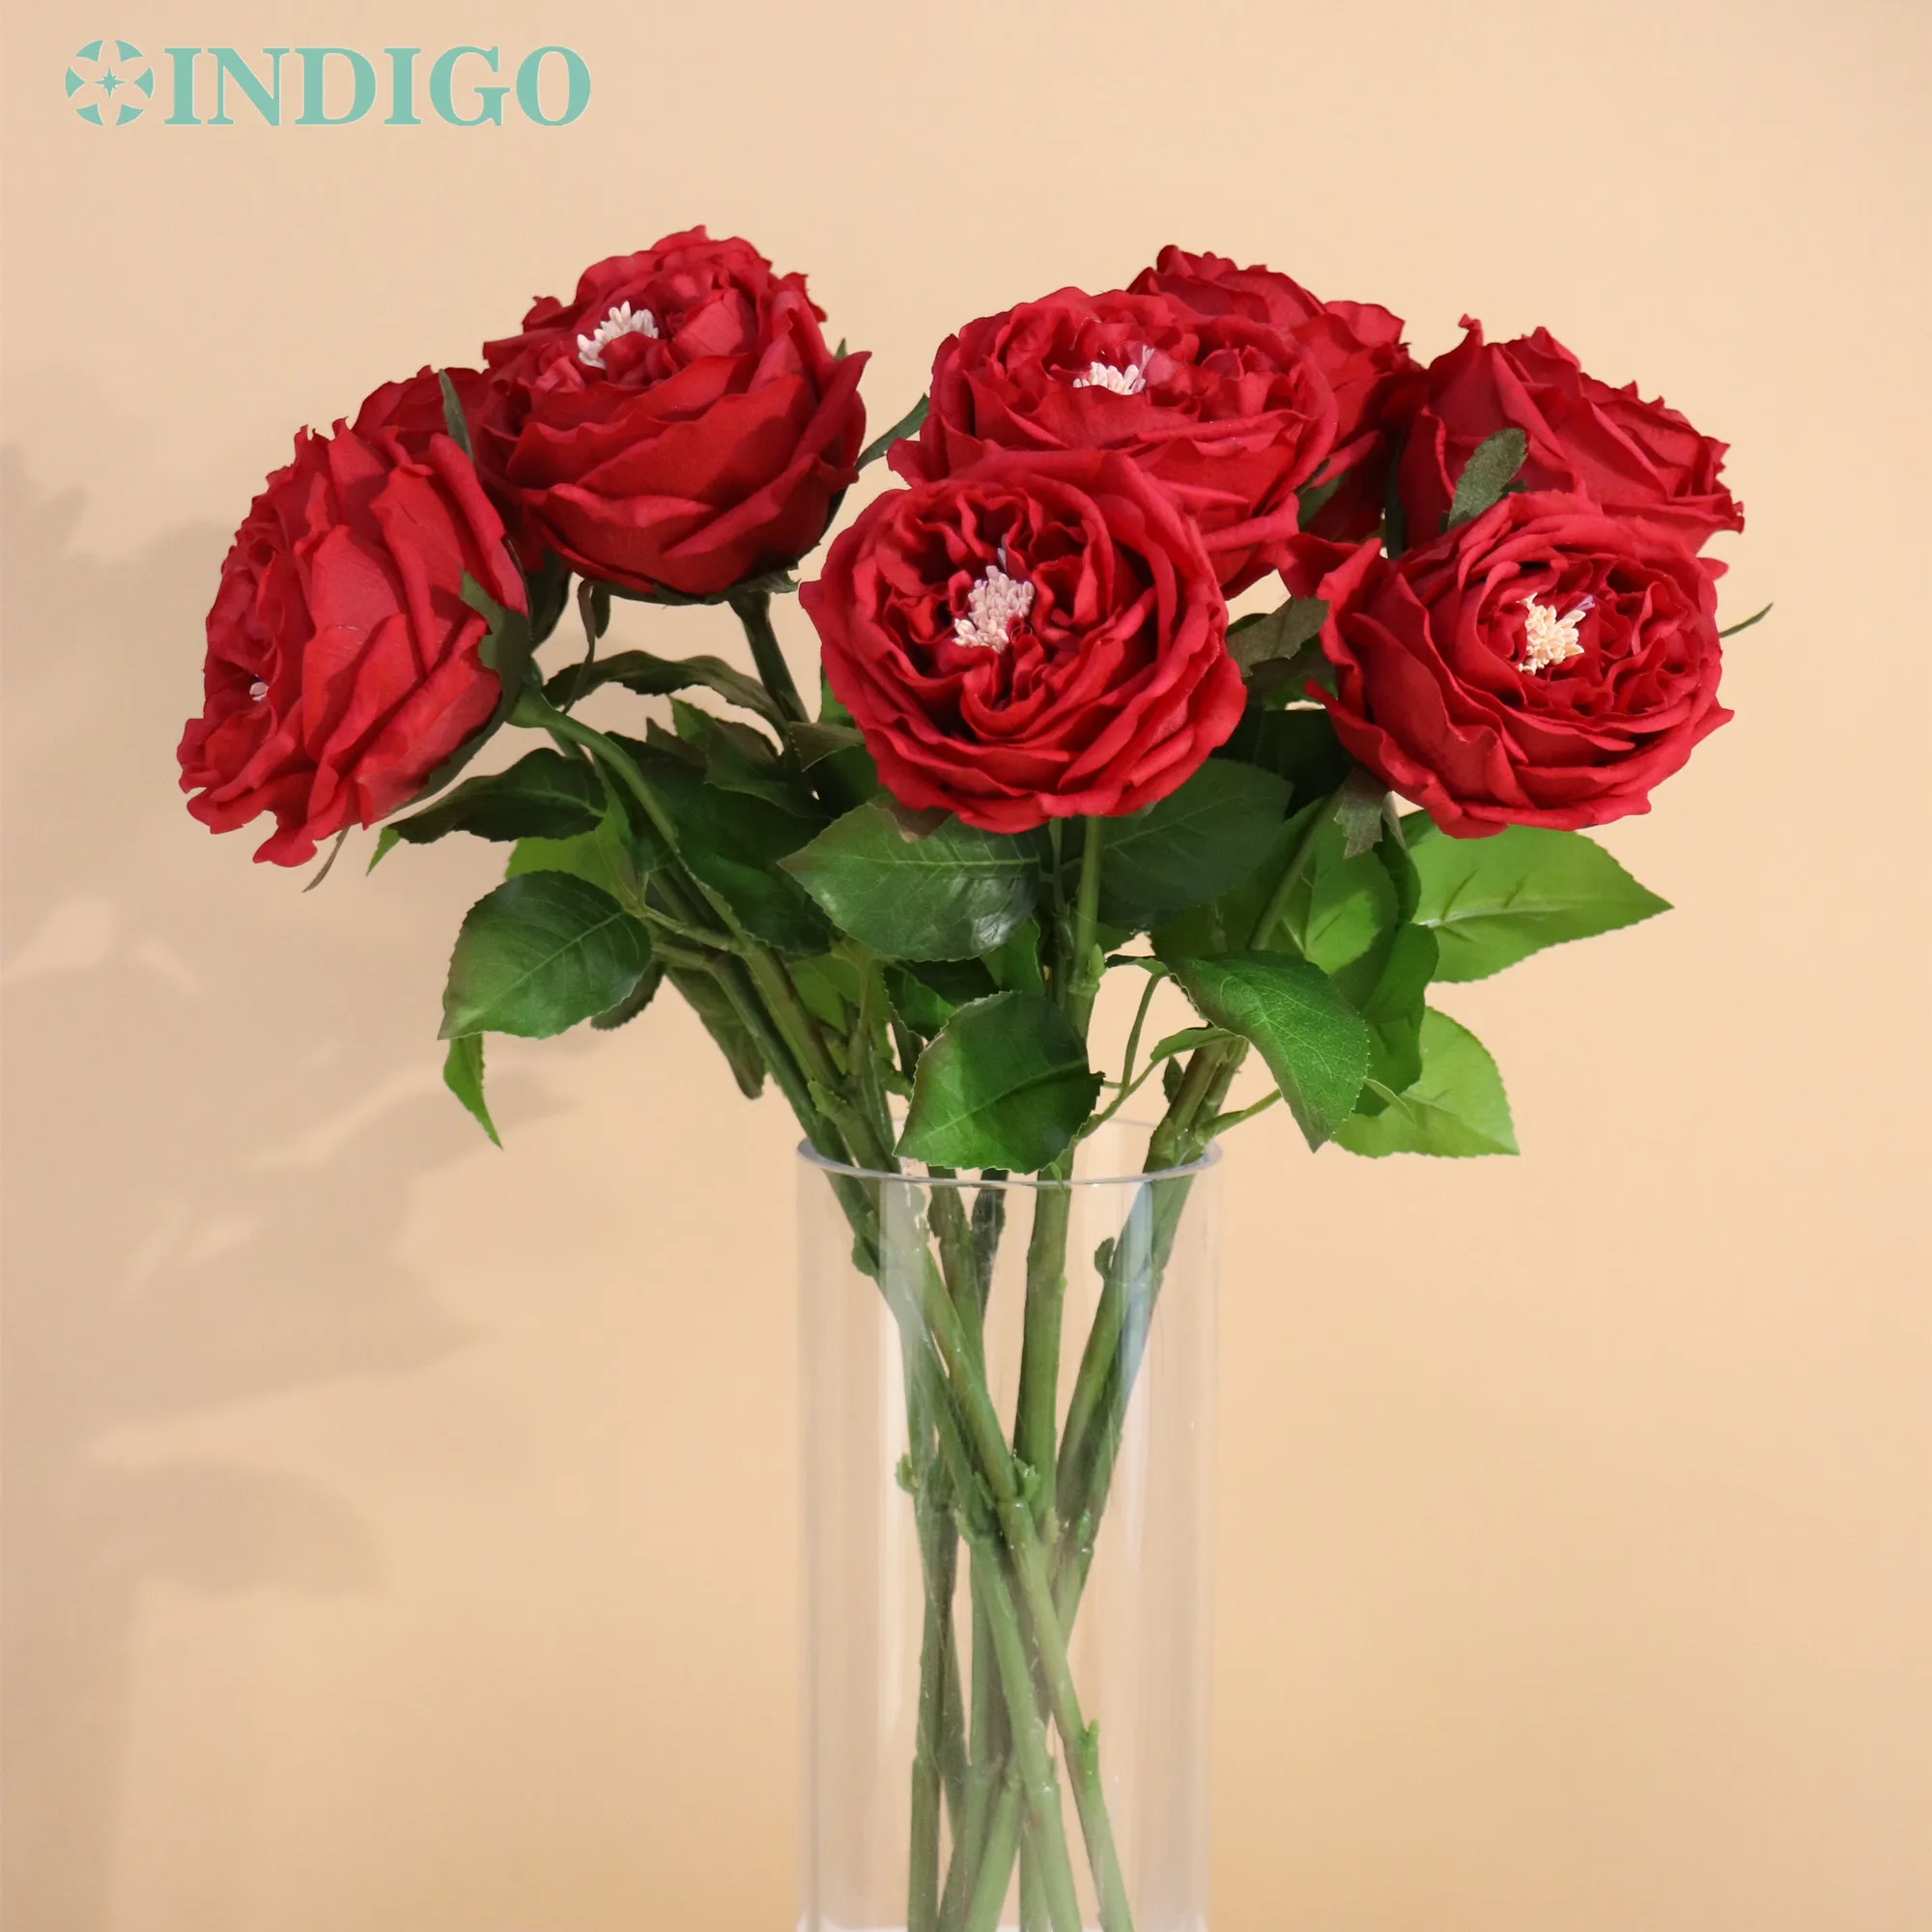 

INDIGO- Austin Rose Artificial Flower for Home Decoration, Latex Real Touch, Wedding, Event, Party Display, 5 Stems Per Lot